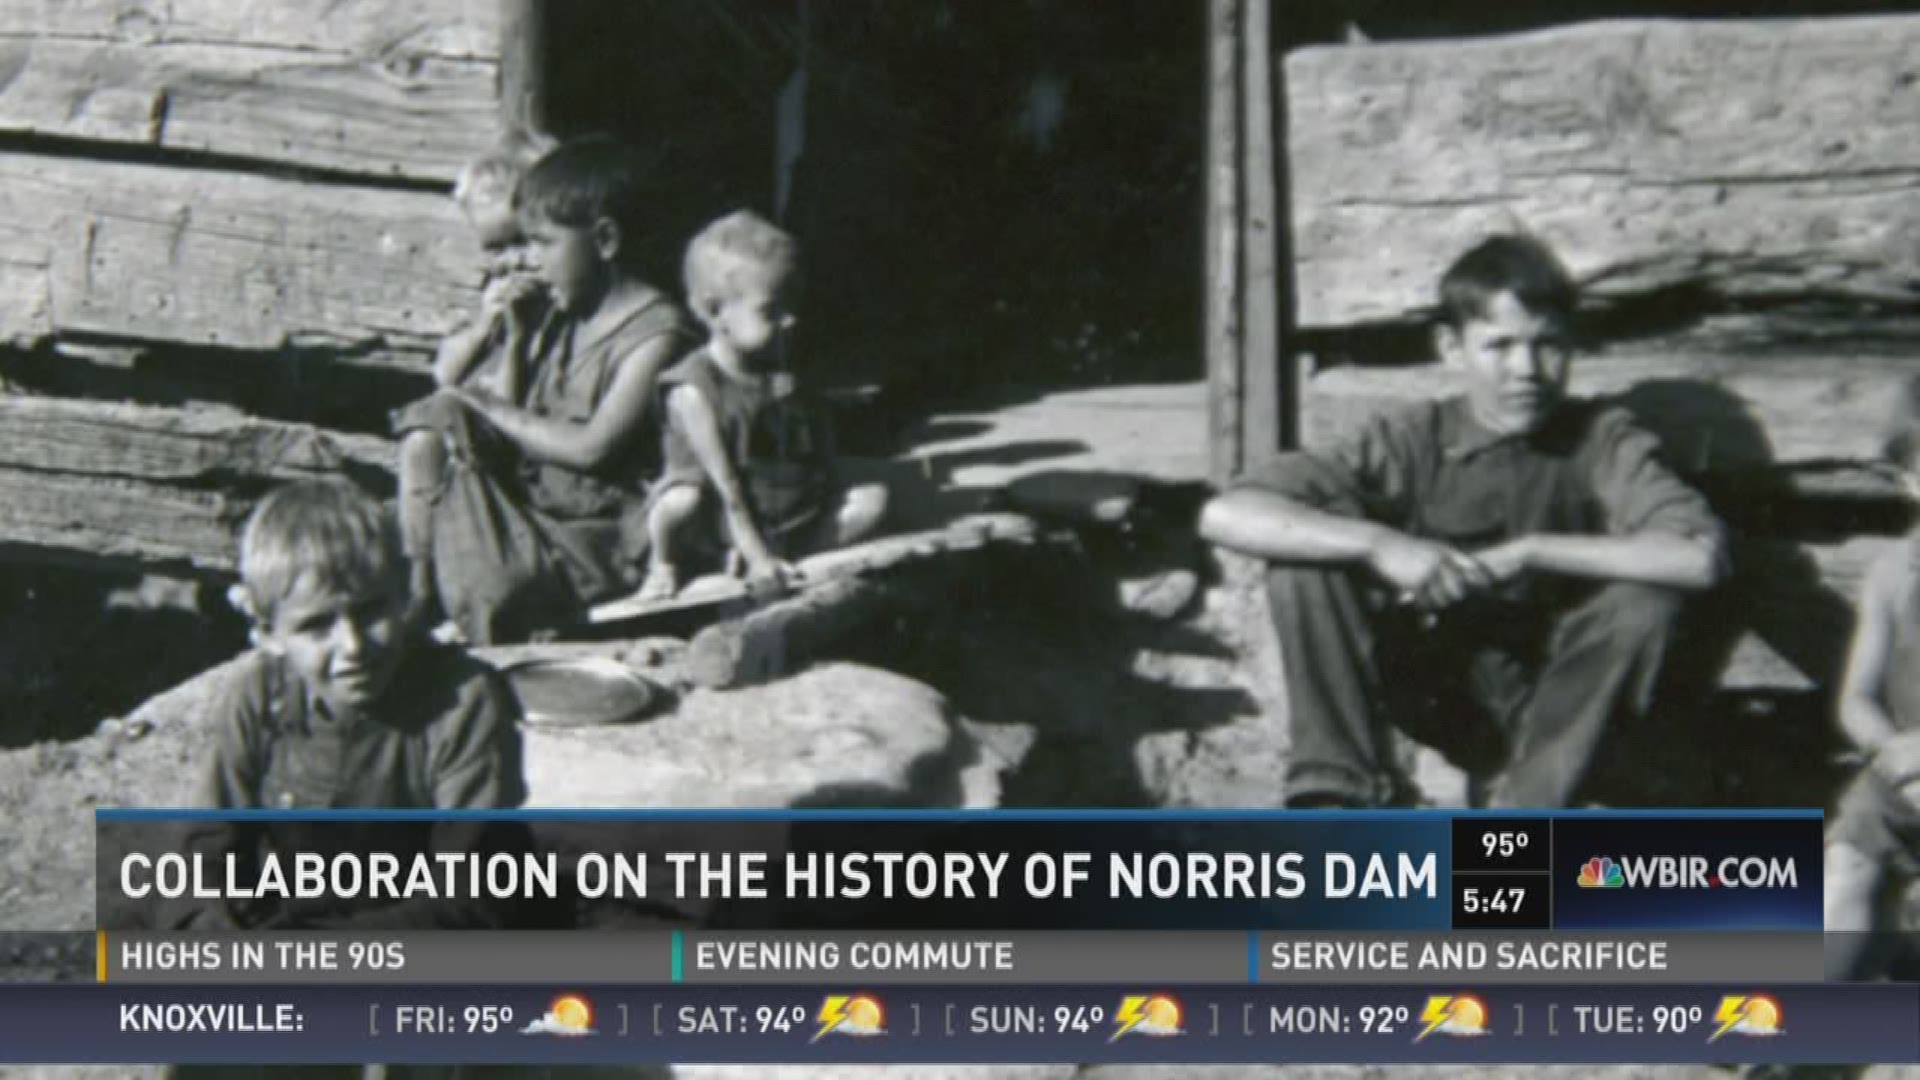 Heartland Series creator Steve Dean sits down to talk about the importance of telling the history of the Norris Dam.